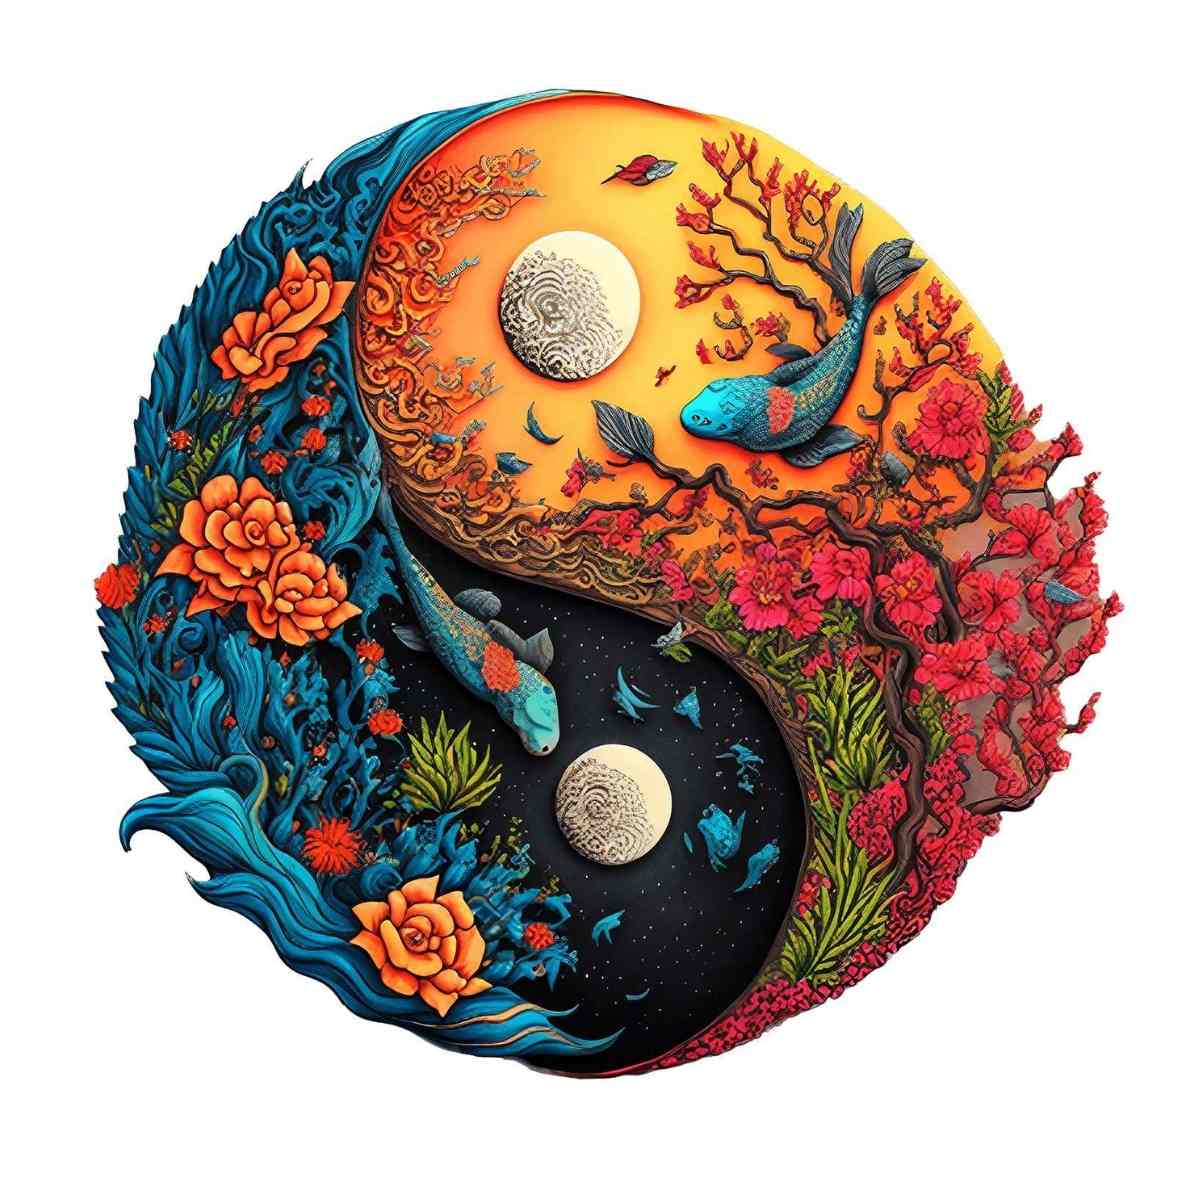 Animal Jigsaw Puzzle > Wooden Jigsaw Puzzle > Jigsaw Puzzle A5 Sea Life Yin Yang - Jigsaw Puzzle